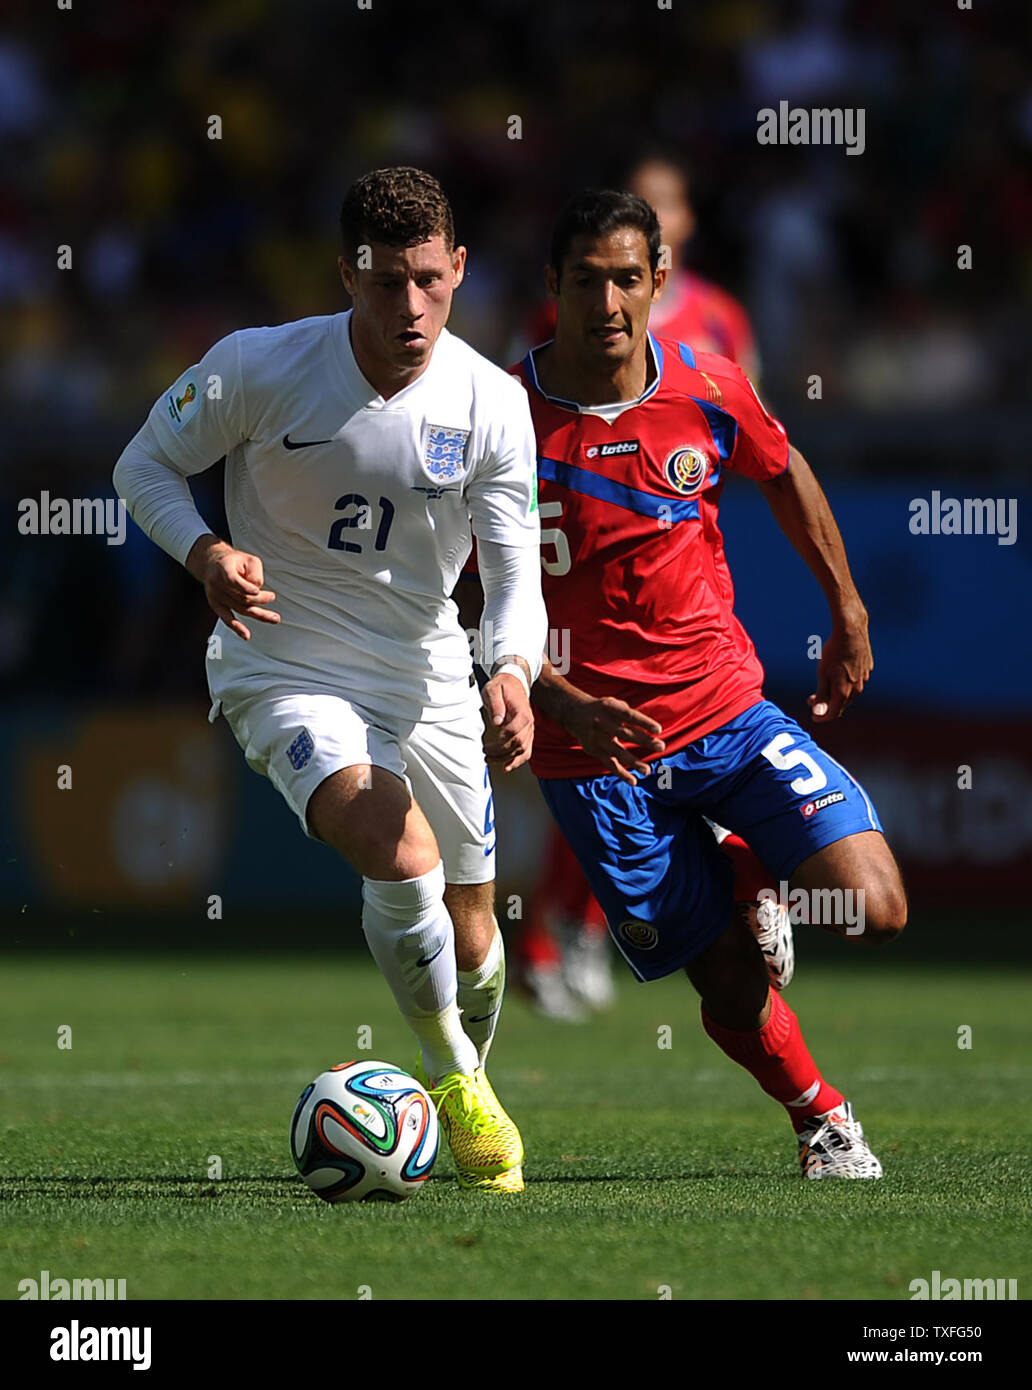 Celso Borges of Costa Rica chases Ross Barkley (L) of England during the 2014 FIFA World Cup Group D match at the Estadio Mineirao in Belo Horizonte, Brazil on June 24, 2014. UPI/Chris Brunskill Stock Photo